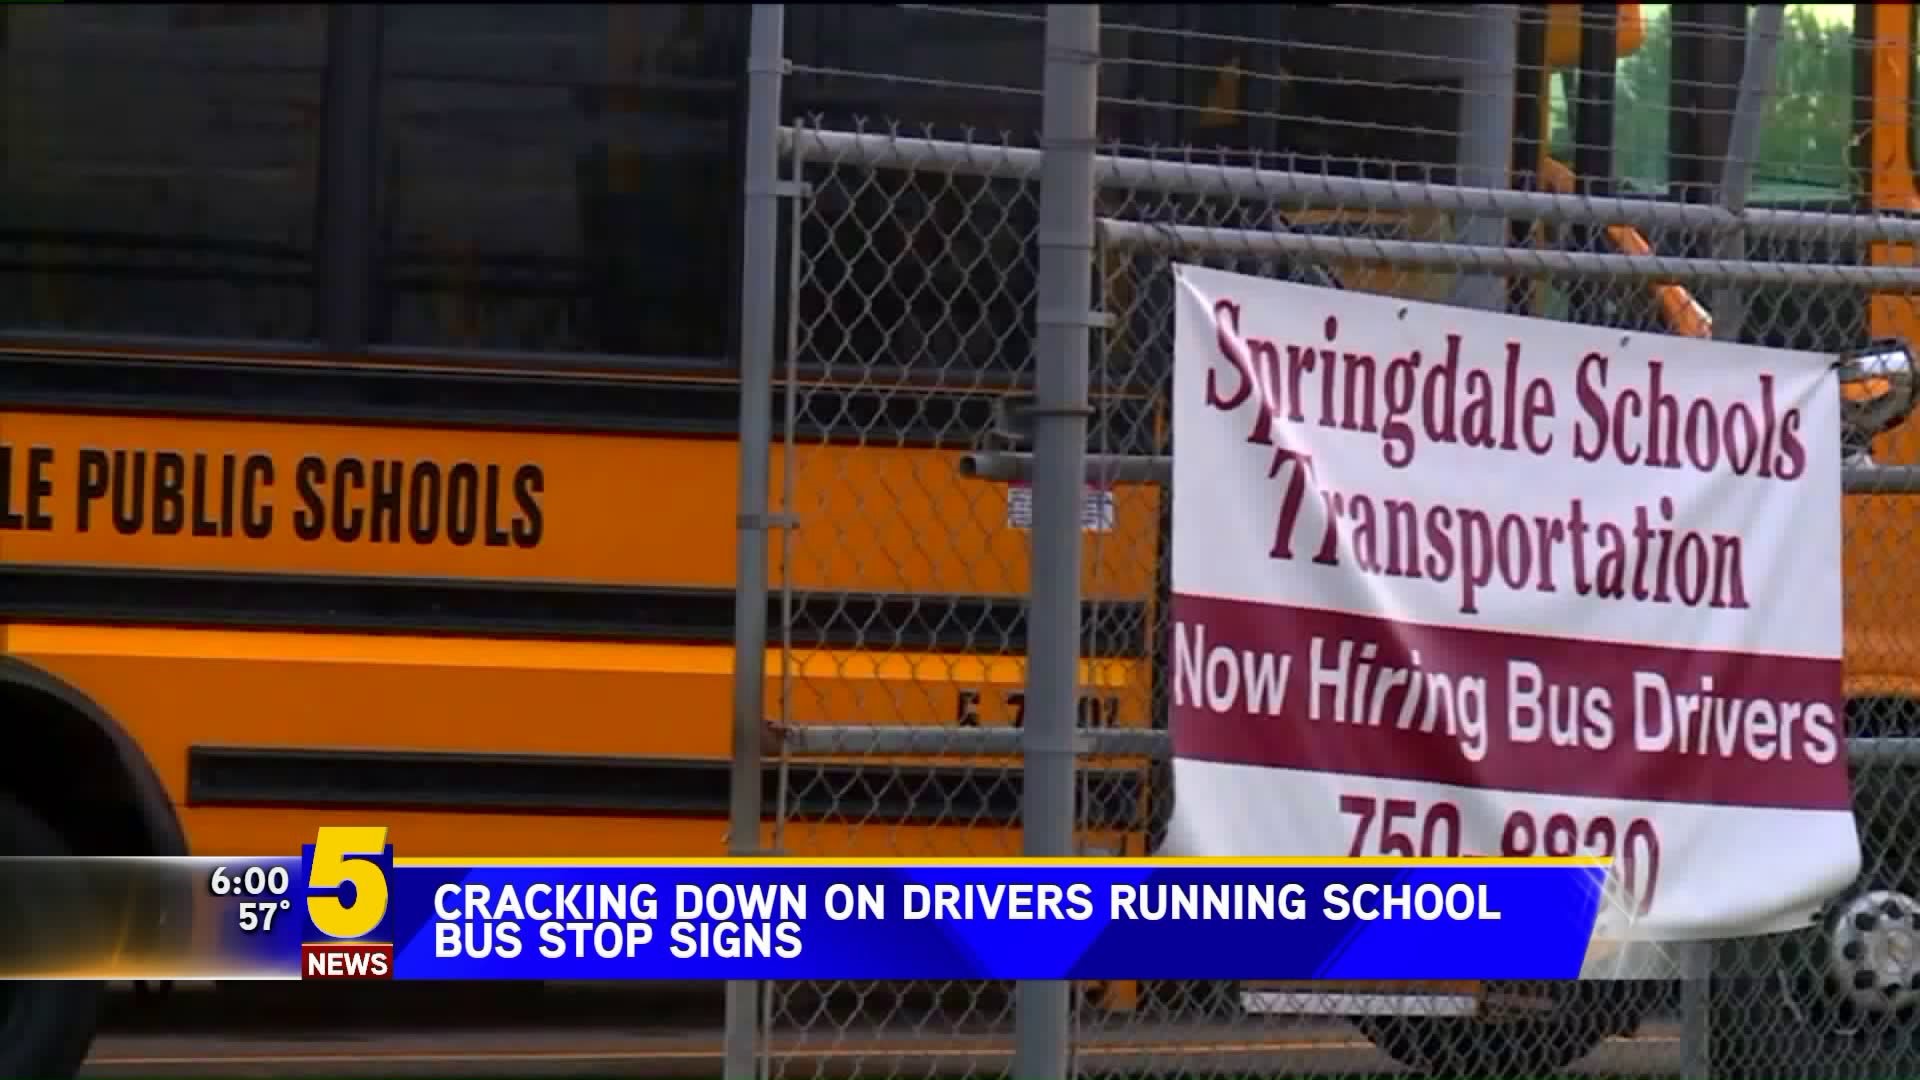 Barling Cracking Down On Drivers Running School Bus Stop Signs